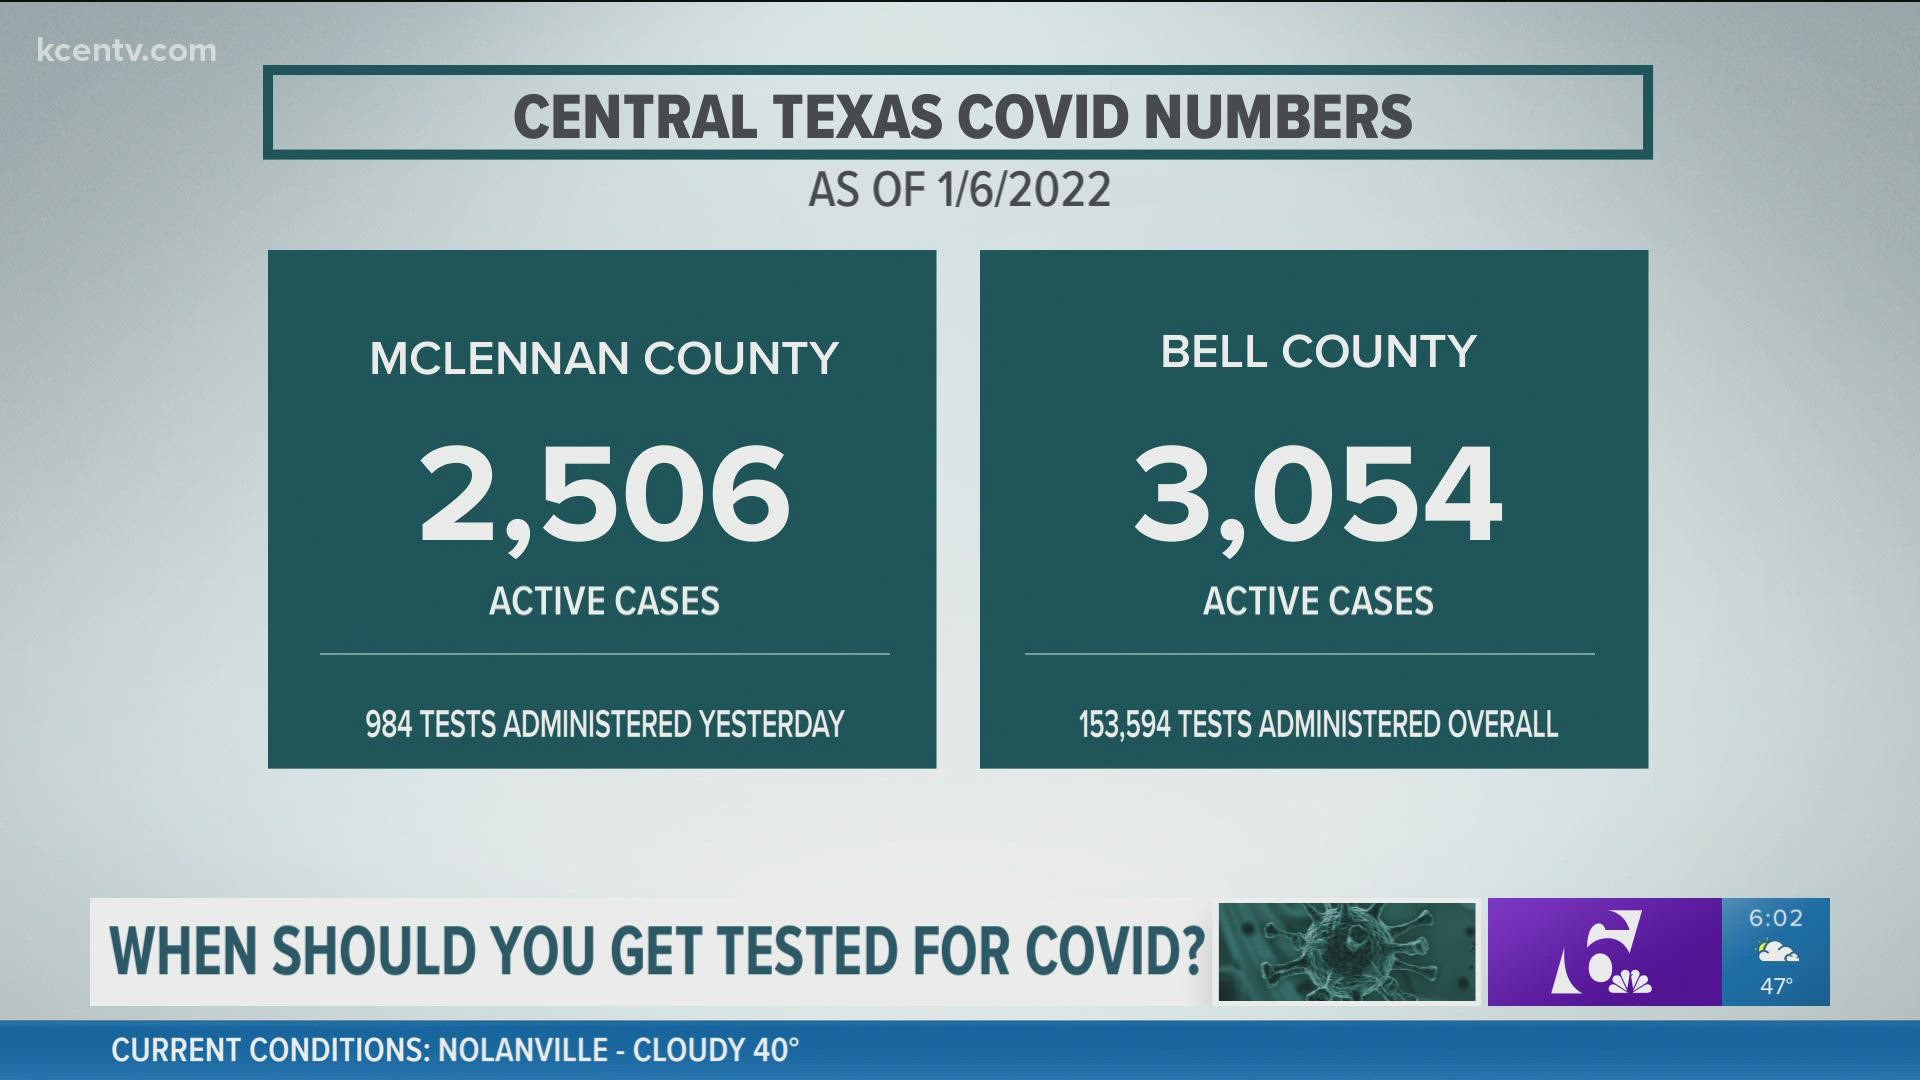 There's been a rise in COVID cases, leaving many wondering when to get tested.